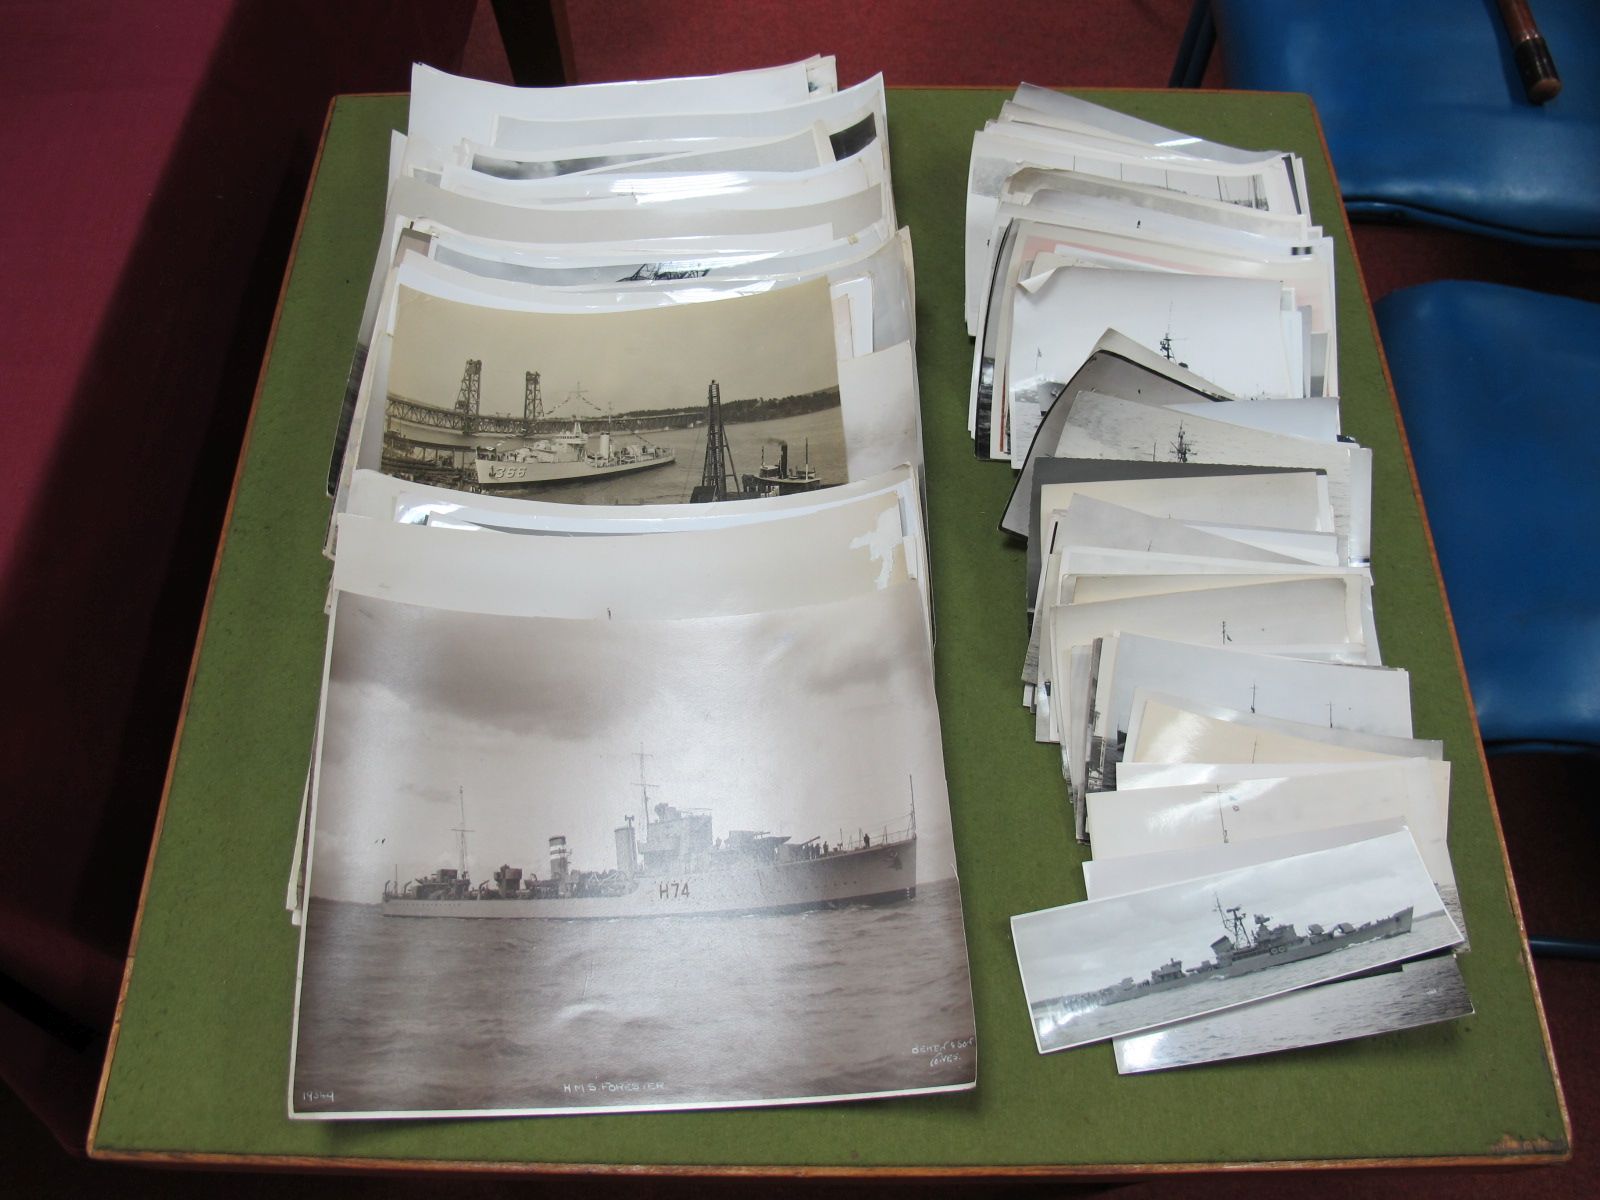 A Large Quantity of Mid XX Century Often Official and Press Photographs of Naval Ships Around The